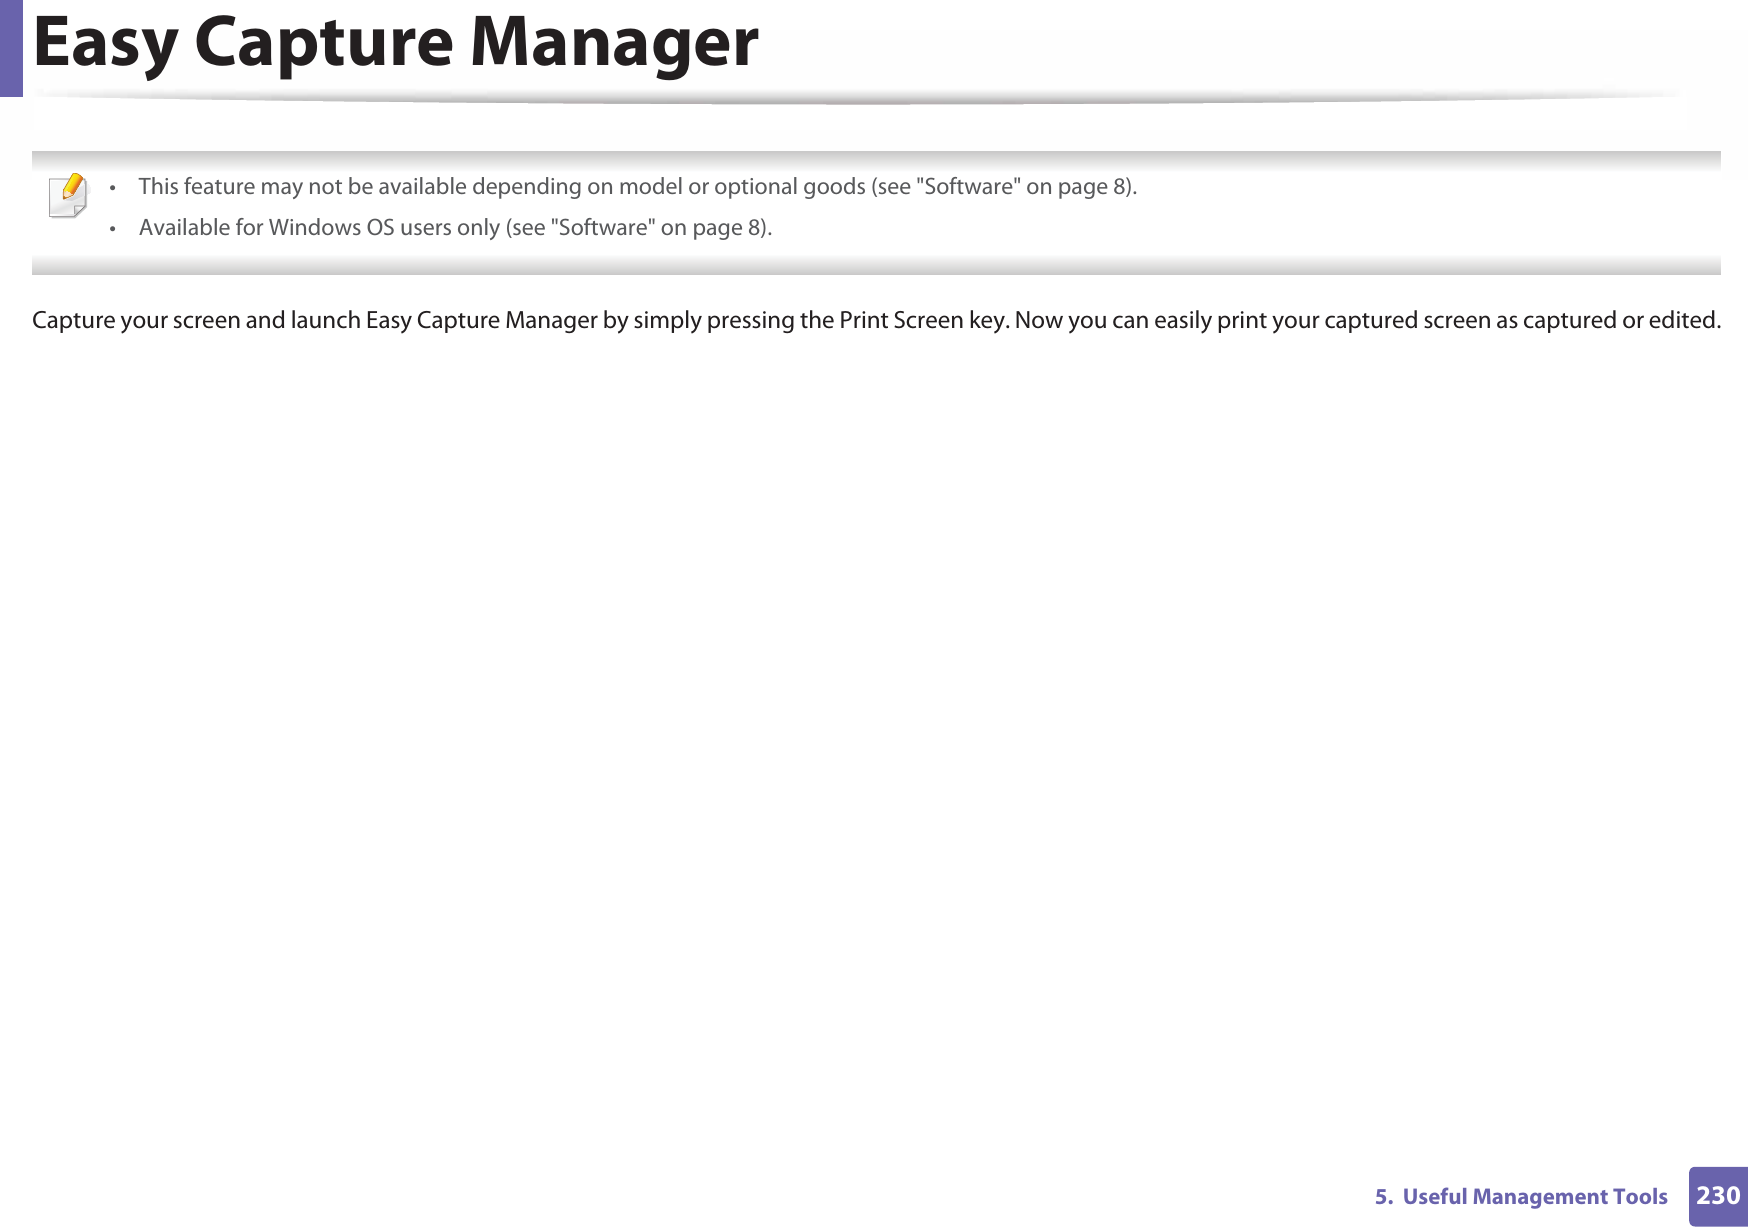 2305.  Useful Management ToolsEasy Capture Manager • This feature may not be available depending on model or optional goods (see &quot;Software&quot; on page 8).• Available for Windows OS users only (see &quot;Software&quot; on page 8). Capture your screen and launch Easy Capture Manager by simply pressing the Print Screen key. Now you can easily print your captured screen as captured or edited.